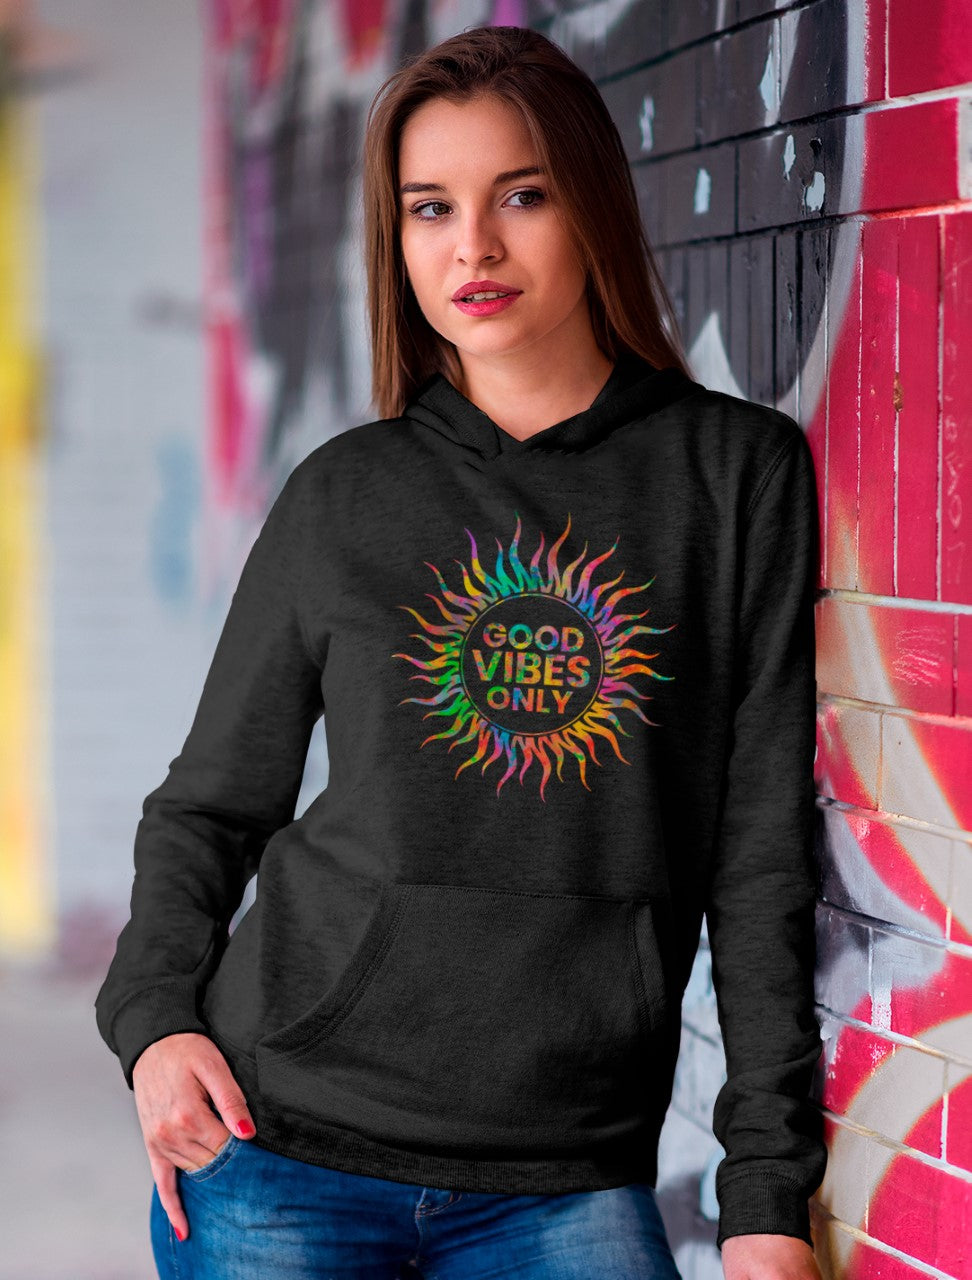 Good Vibes Only - Women - Happy Fashion Time Store